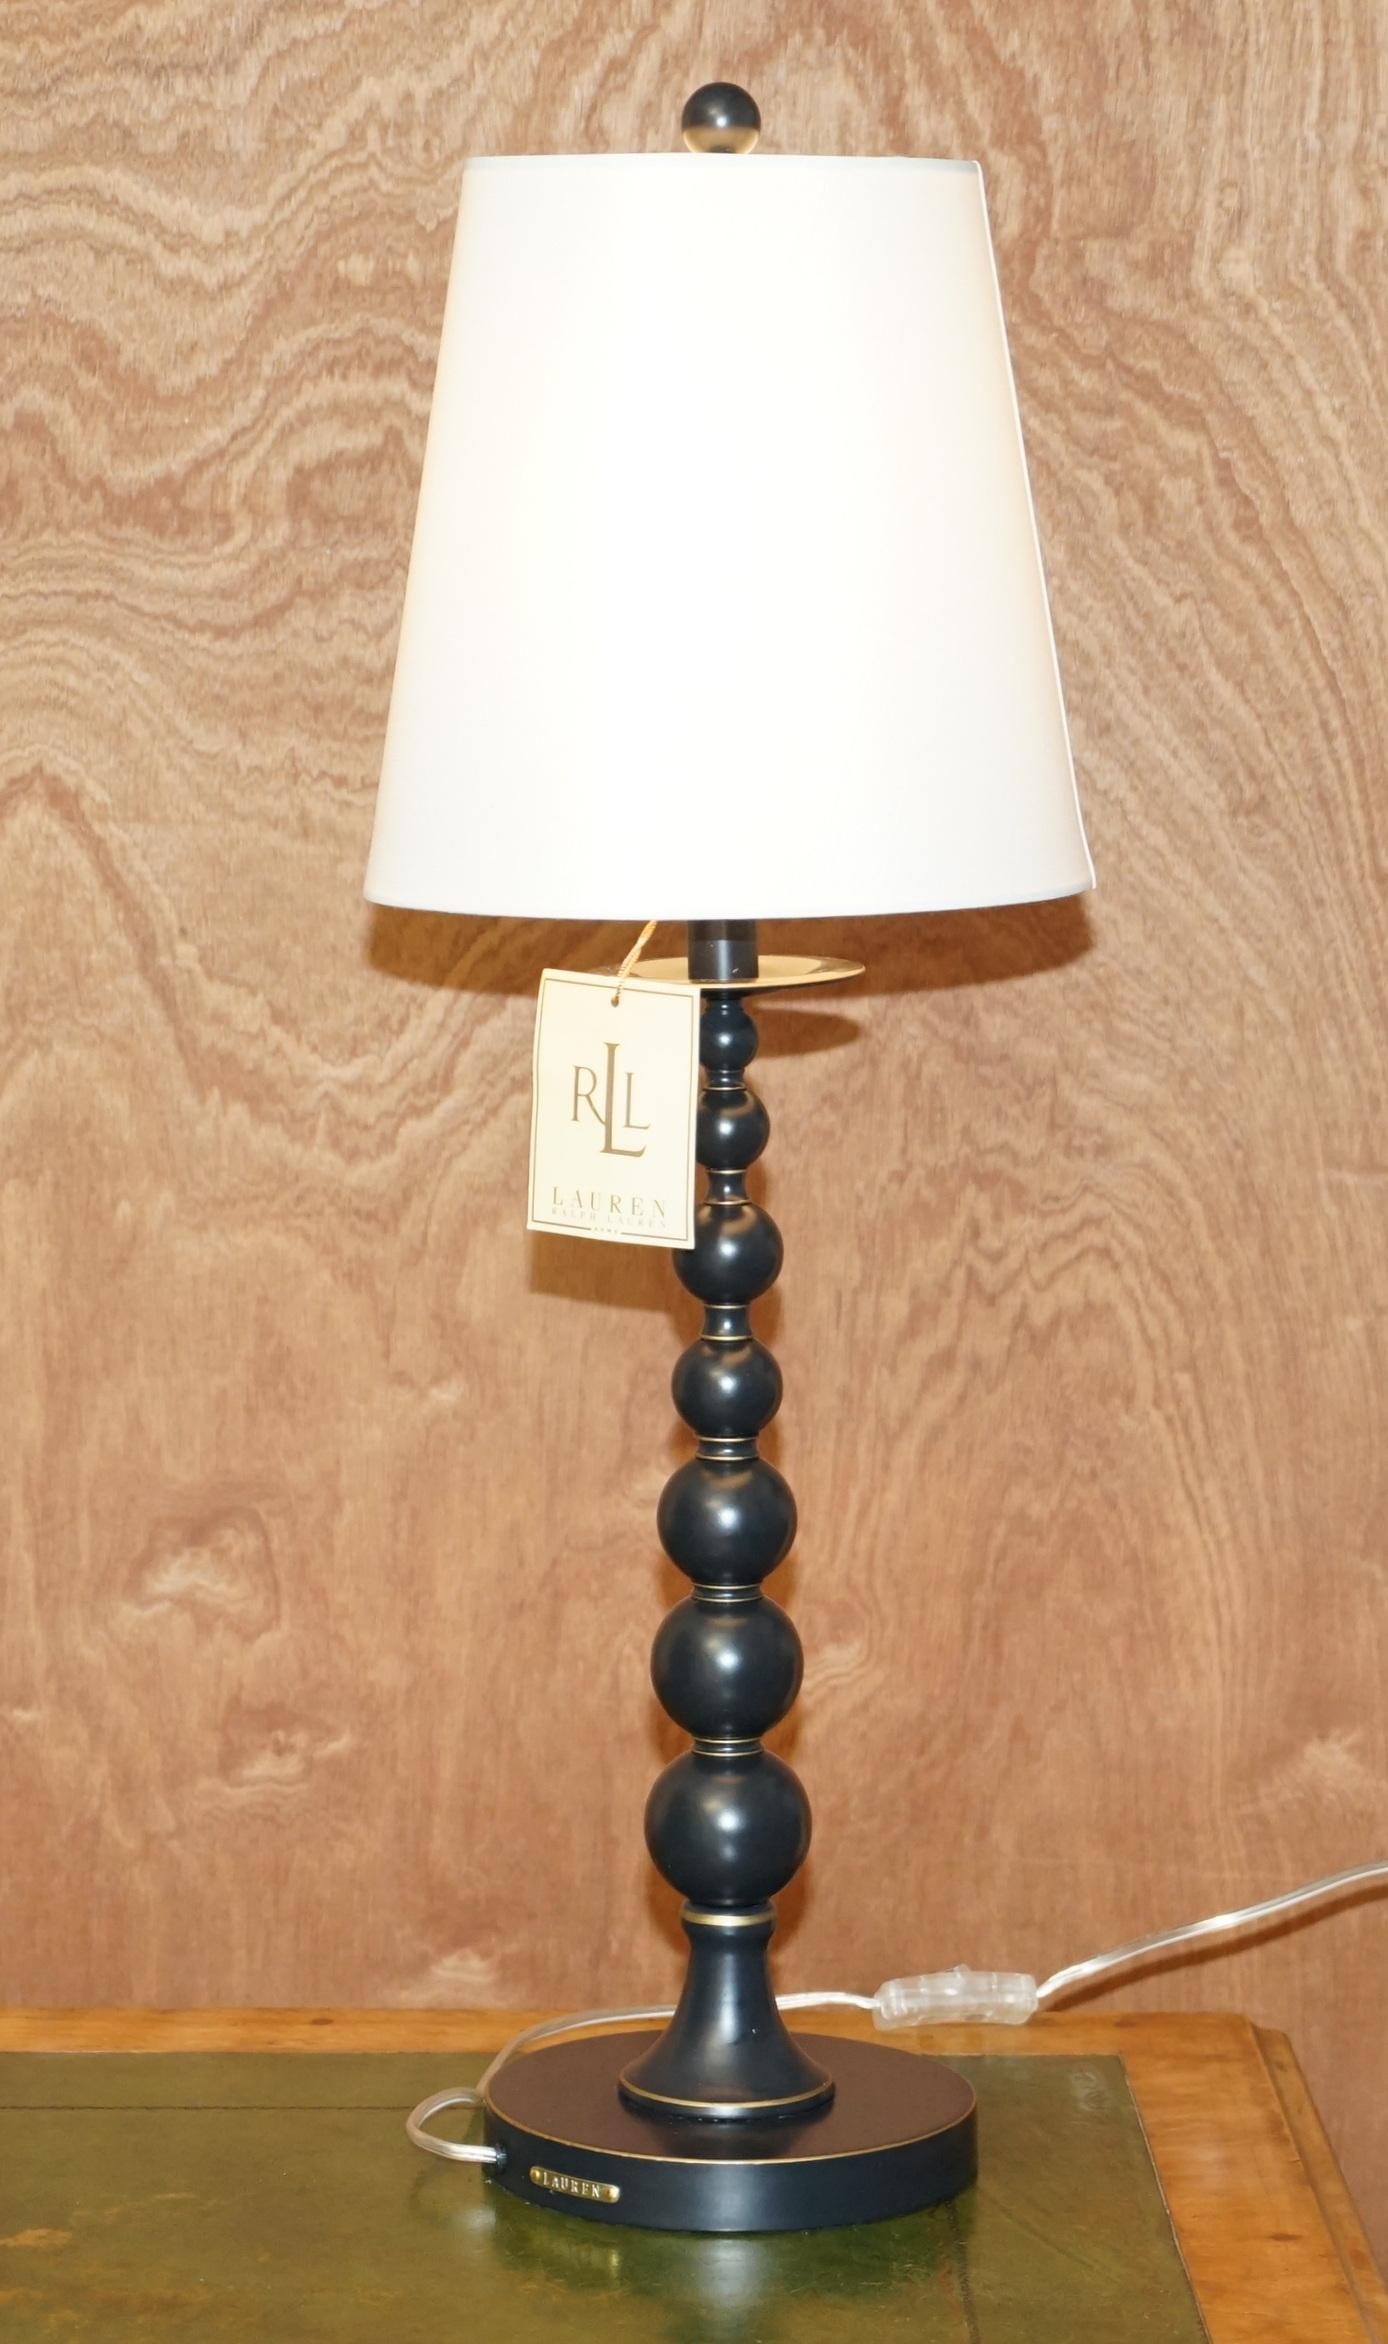 We are delighted to offer for sale this lovely pair of brand new Ralph Lauren Home ebonised bobbin turned lamps with shades

A good looking and decorative pair, they are brand new with original tags, the bulbs are not included

These lamps are